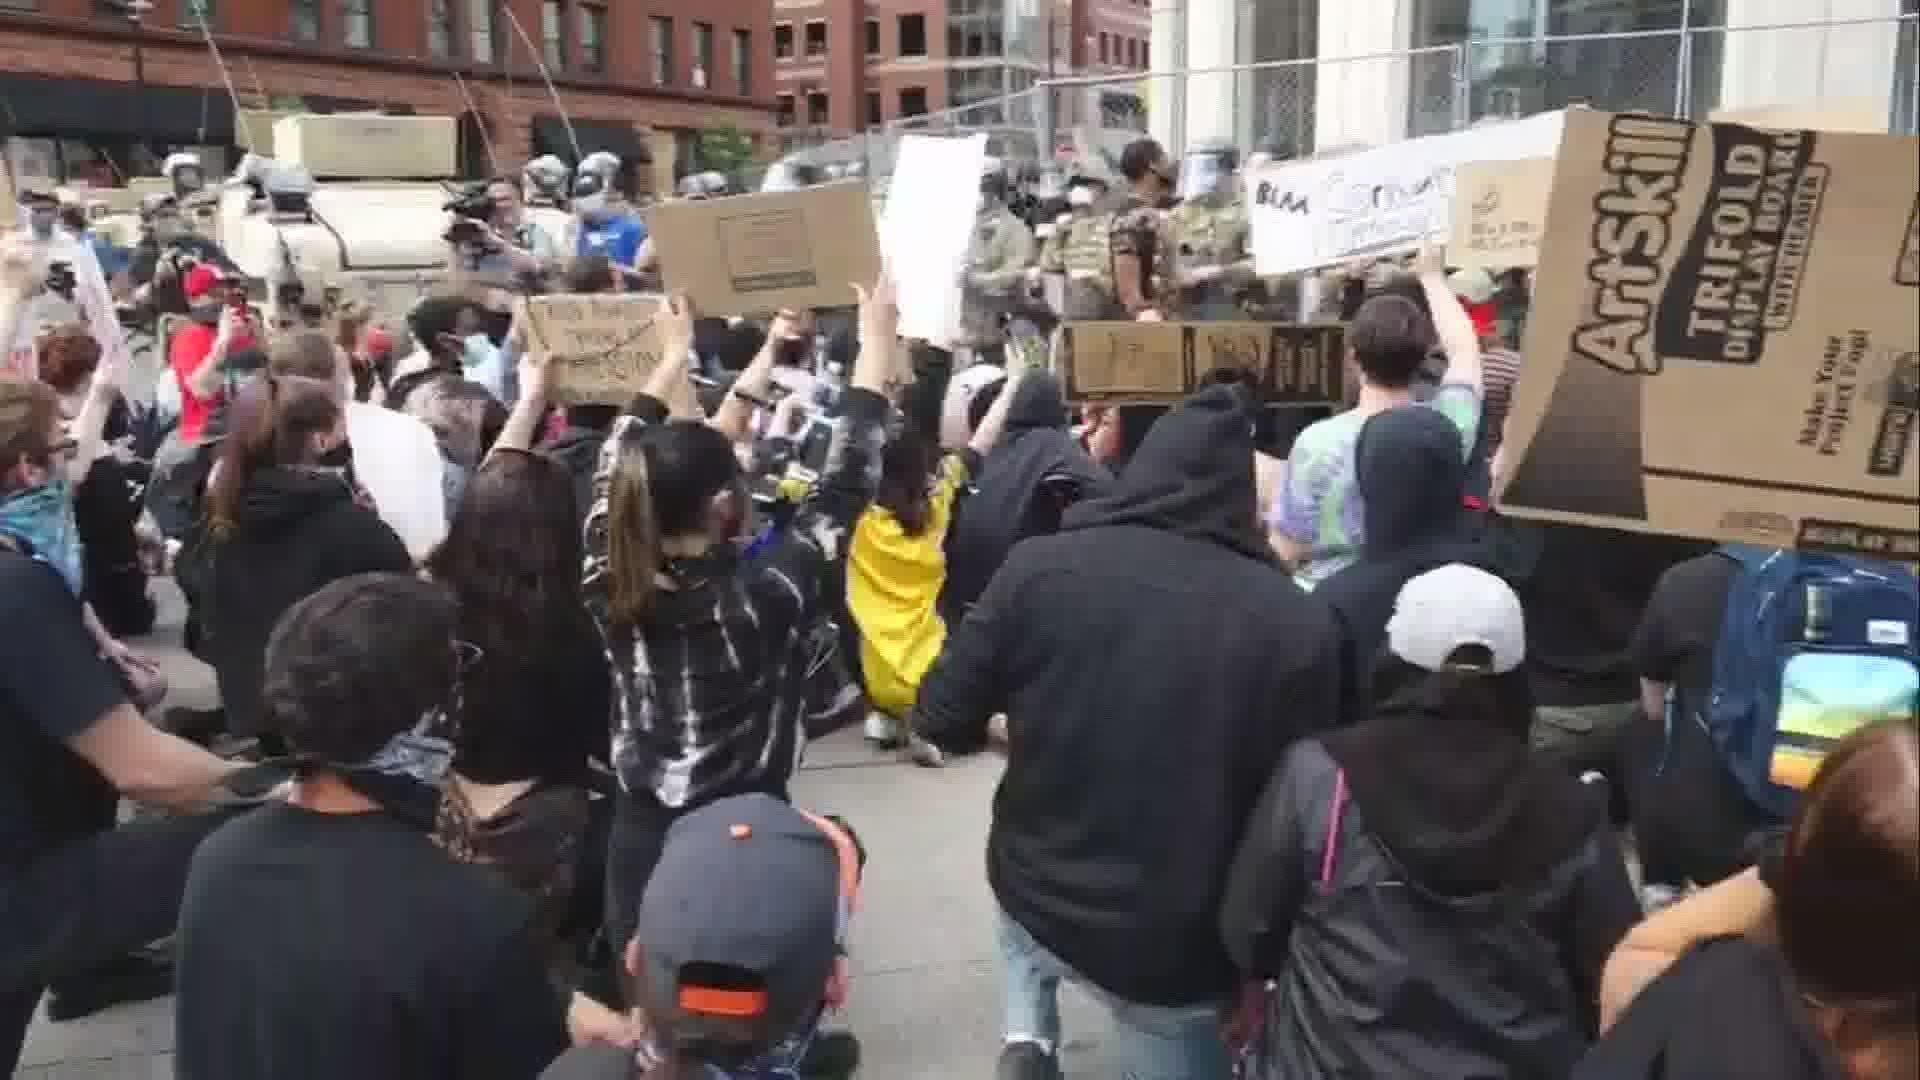 Protesters gathered in downtown Grand Rapids on Monday, June 1. Both the Grand Rapids Police Department (GRPD) and the National Guard set up barricades downtown.